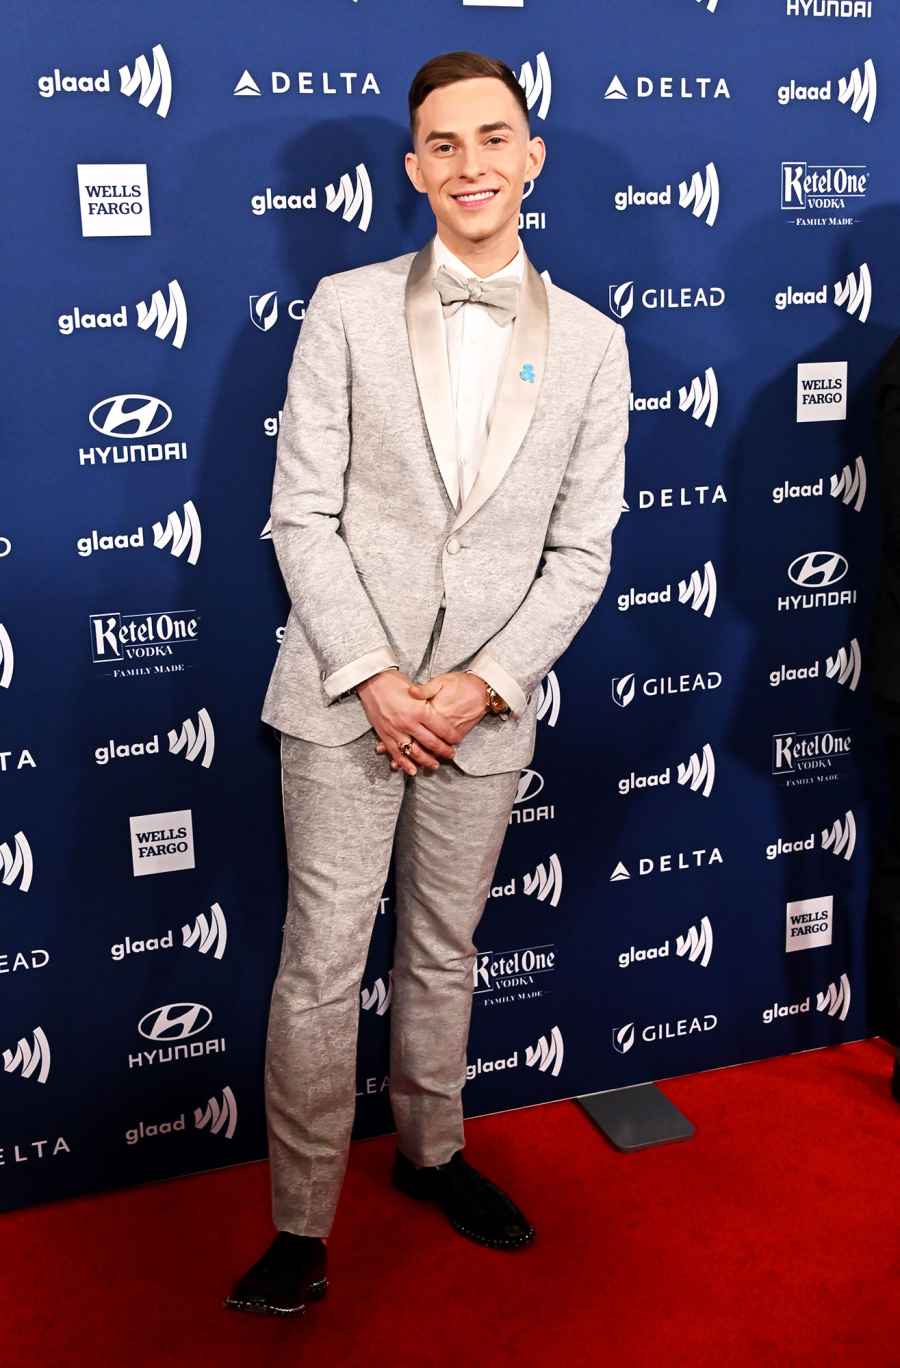 See the Stars at the GLAAD Awards